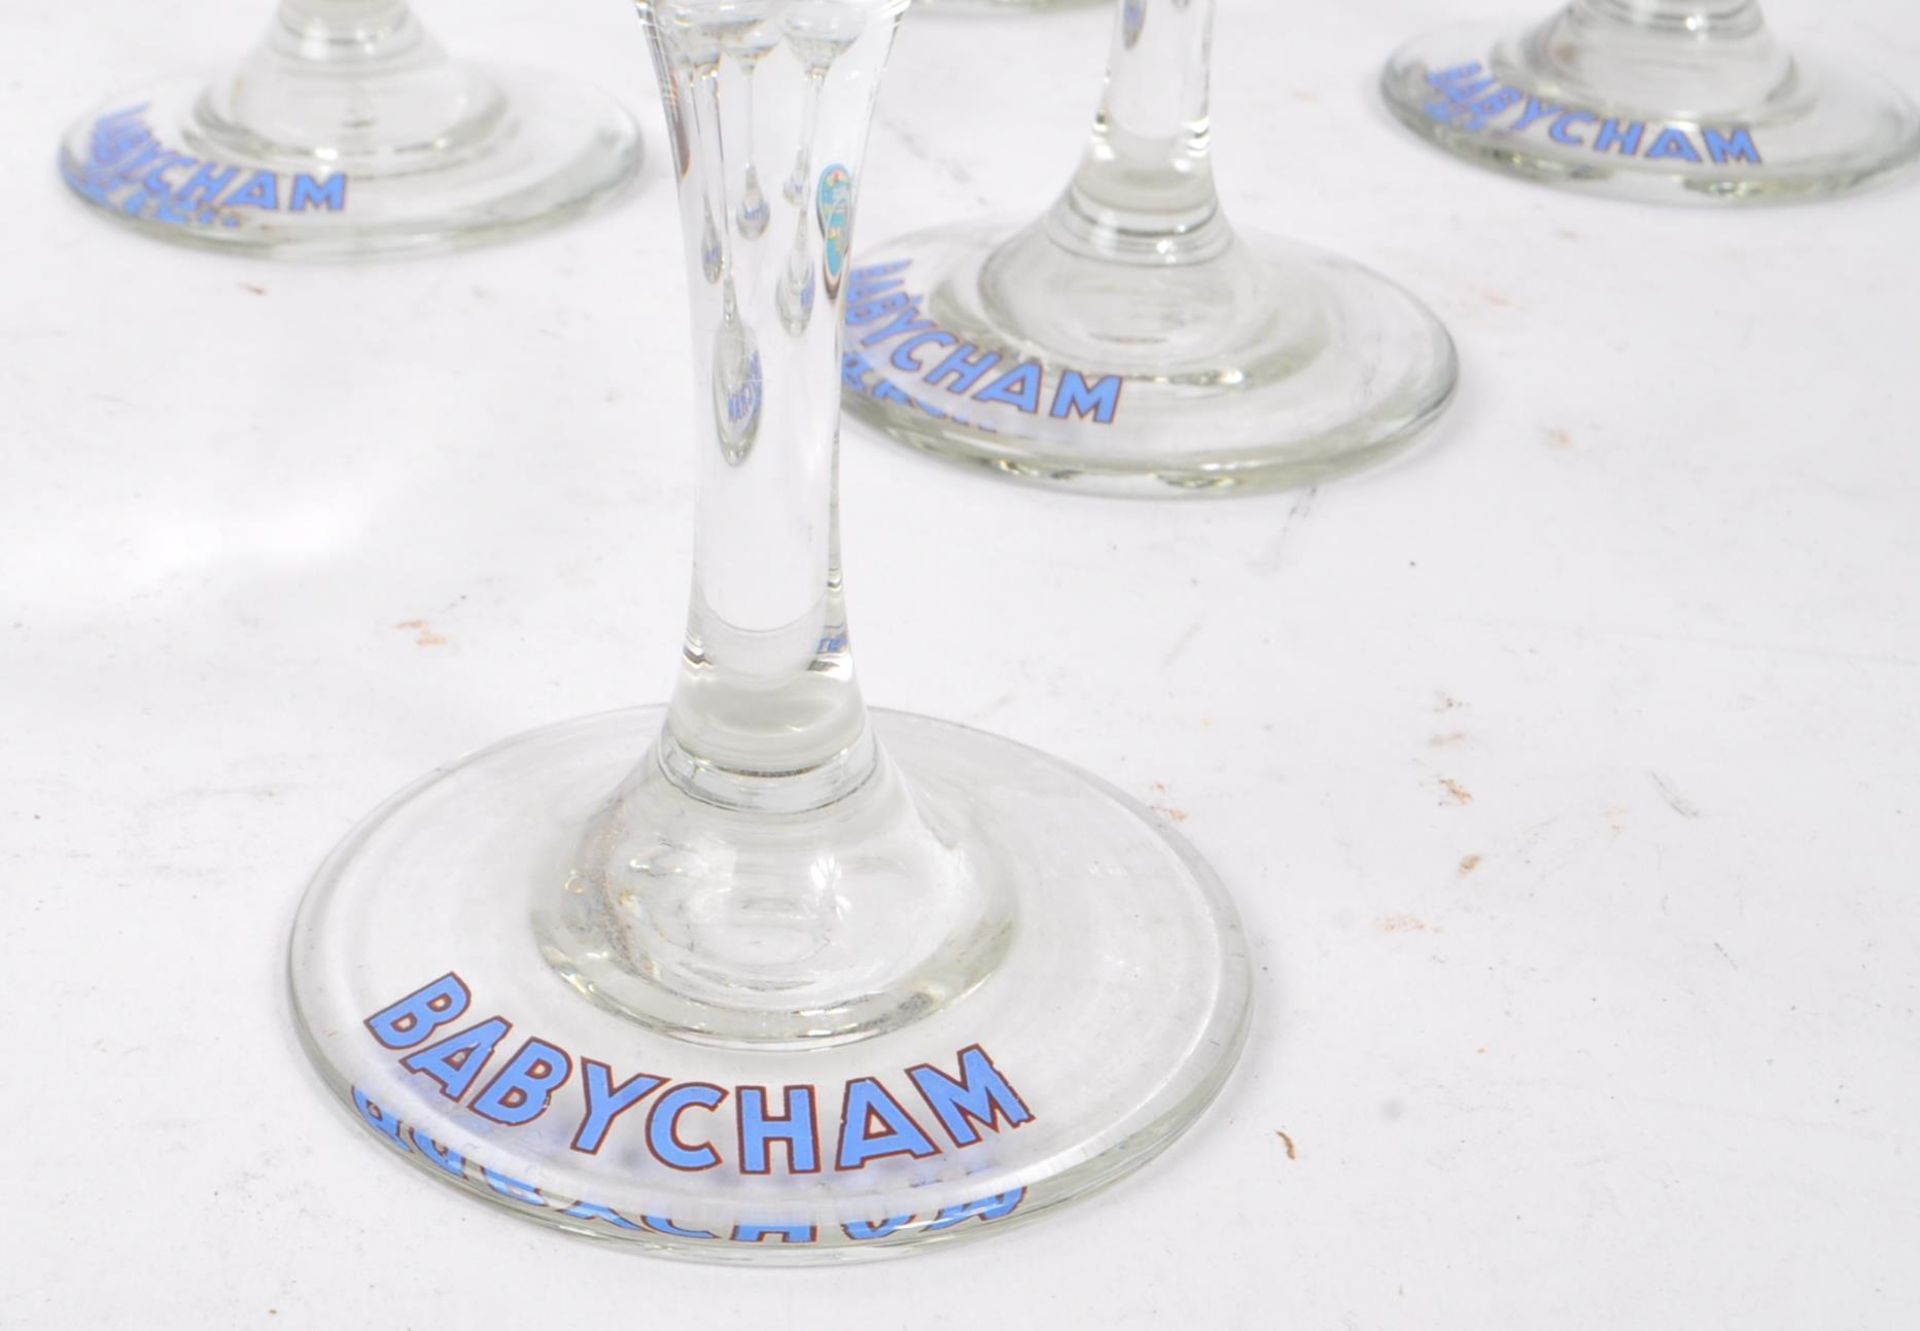 BABYCHAM - COLLECTION OF BRANDED DRINKING GLASSES - Image 6 of 7